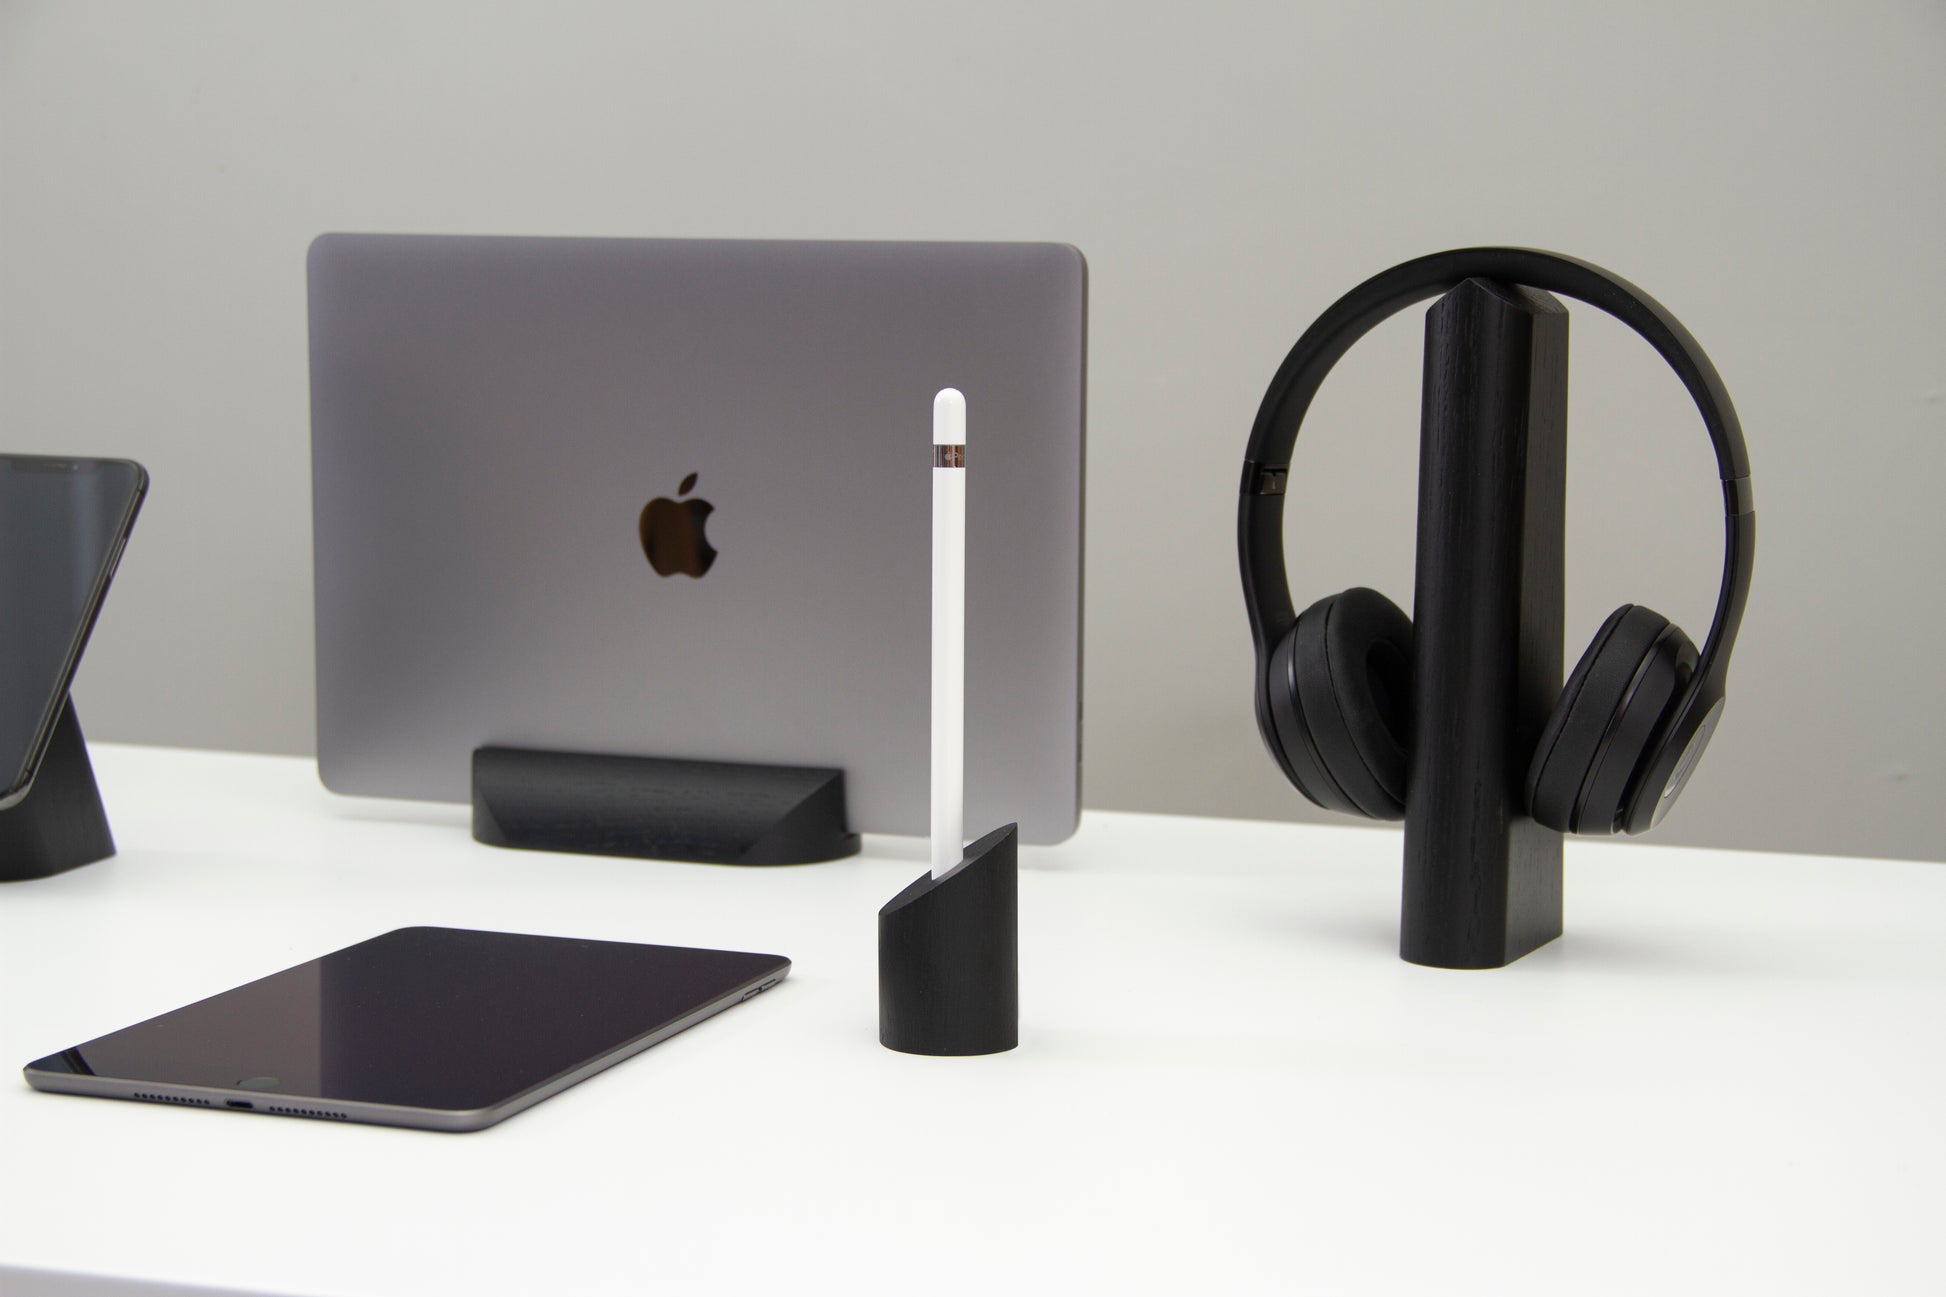 sima Apple Pencil holder on a white home office desk next to a MacBook pro